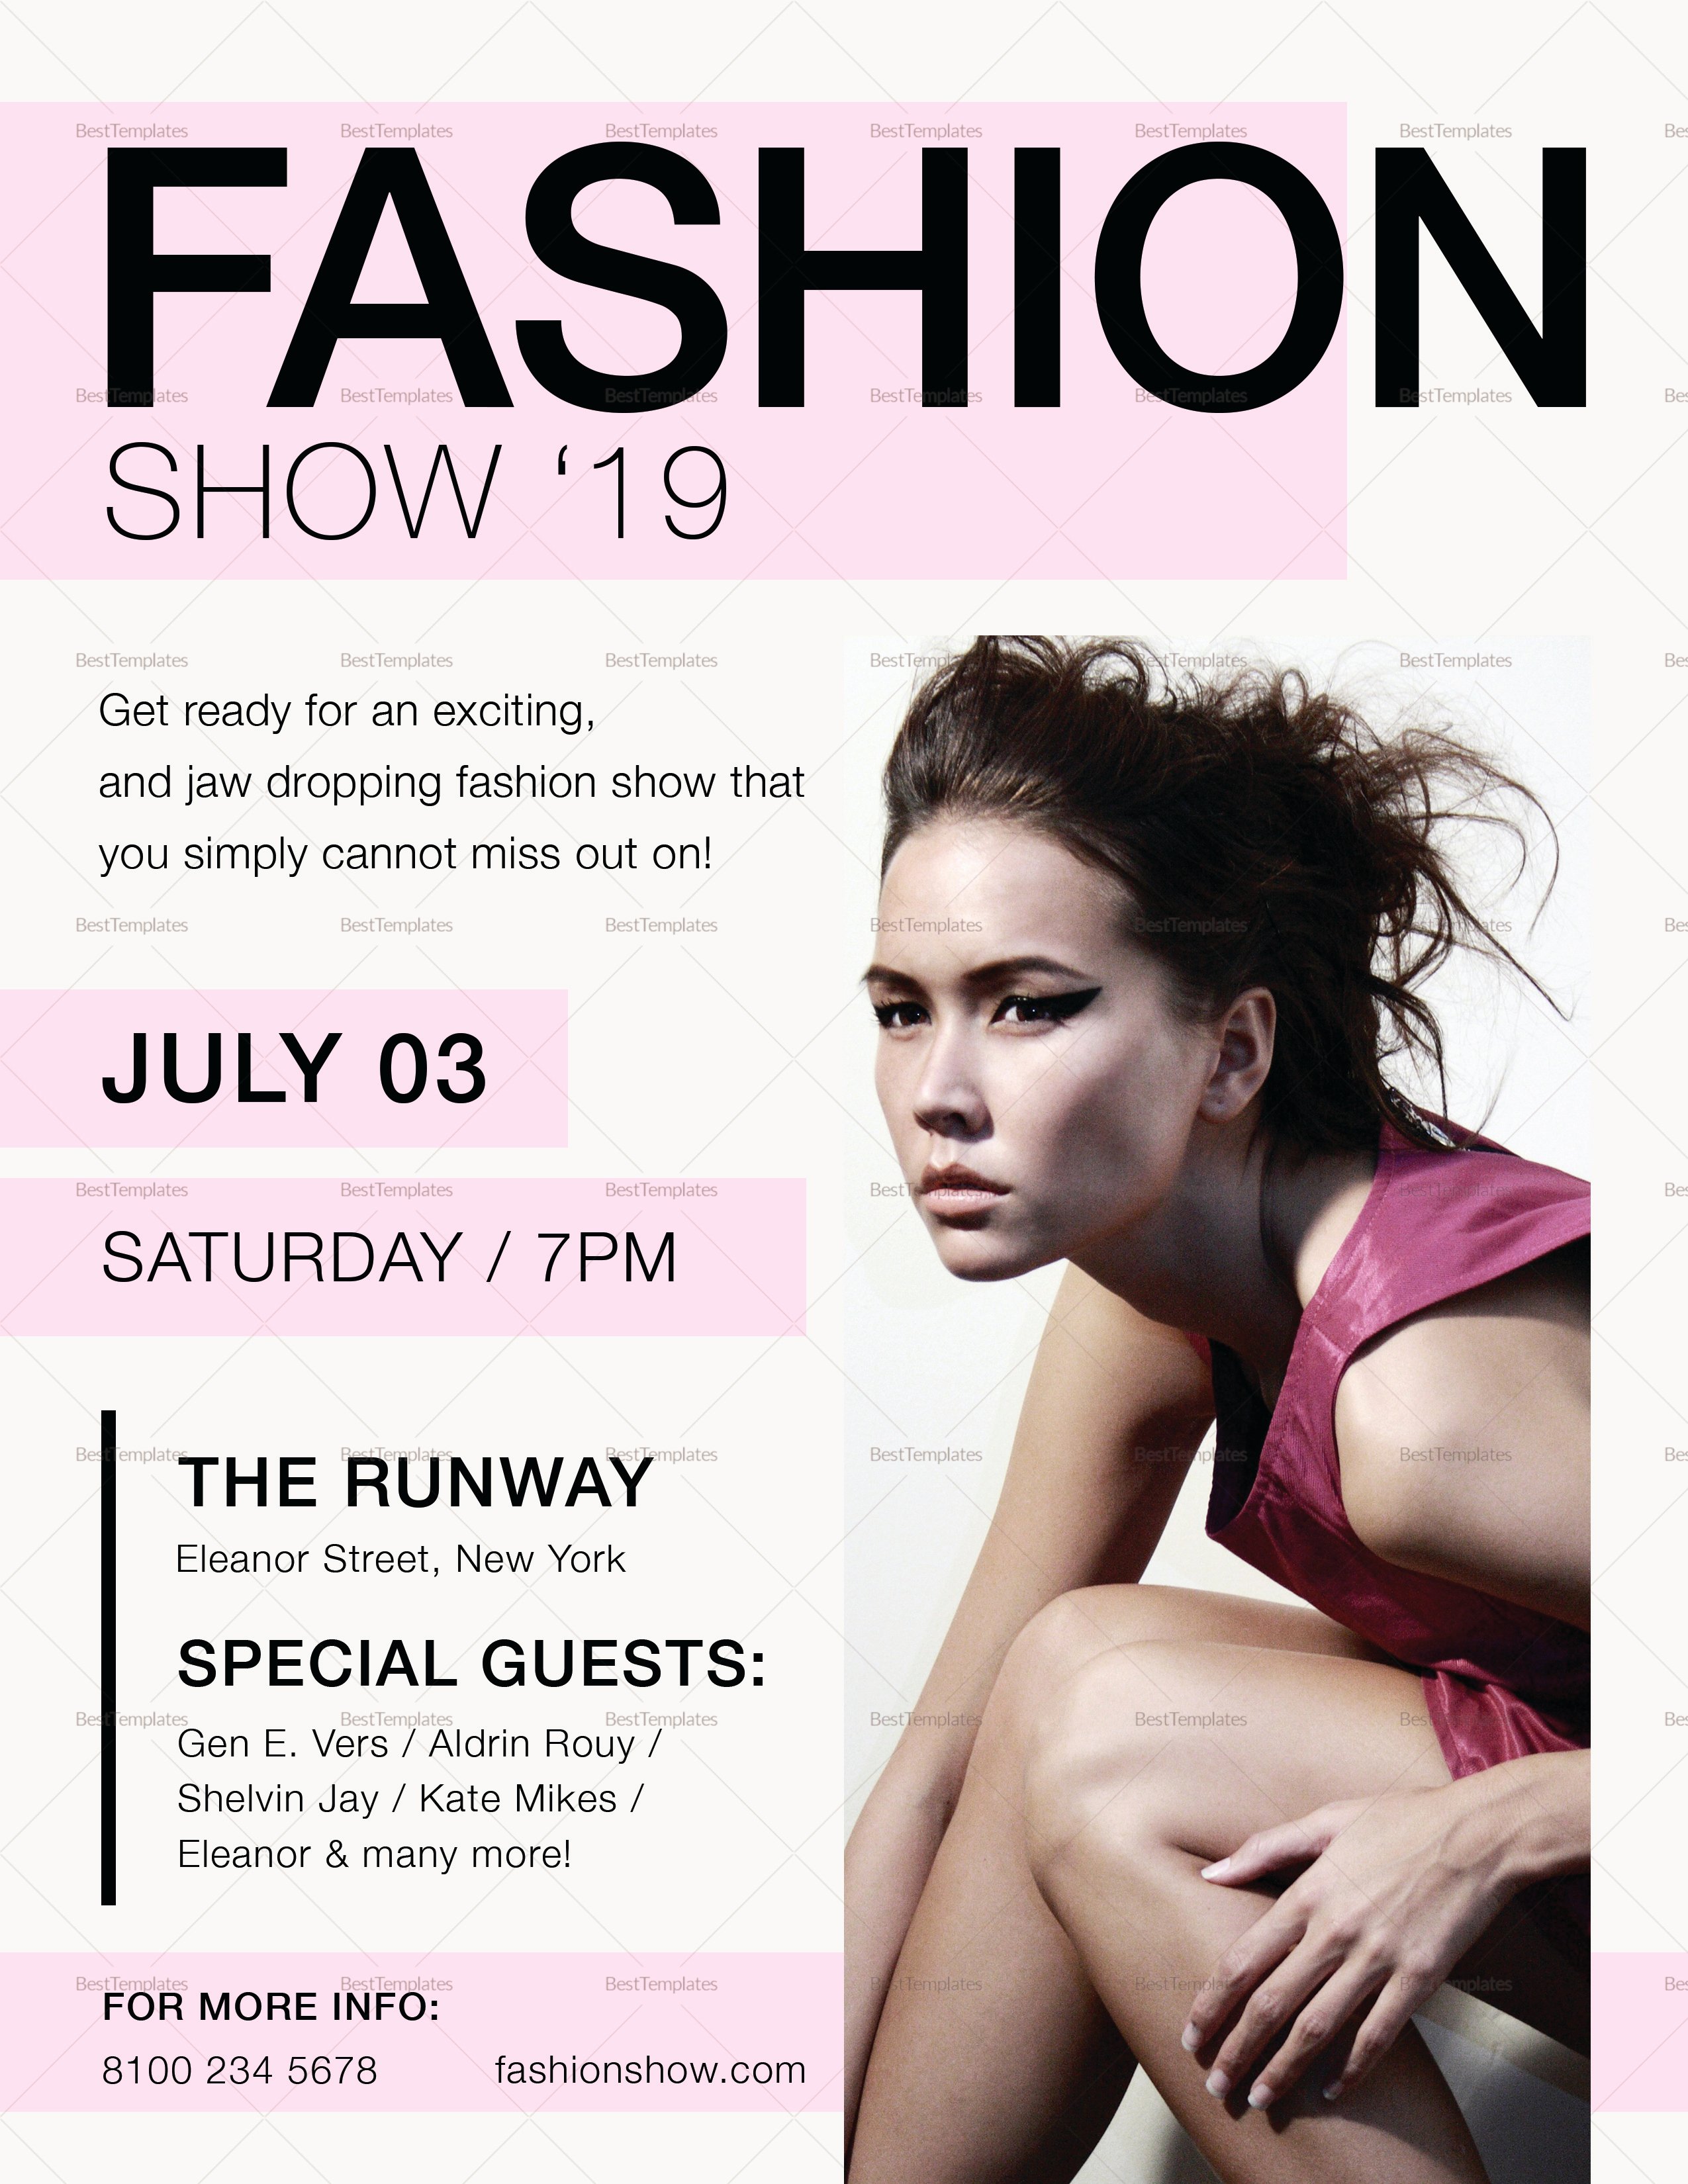 Fashion Show Flyer Template Awesome Fashion Show Flyer Design Template In Psd Word Publisher